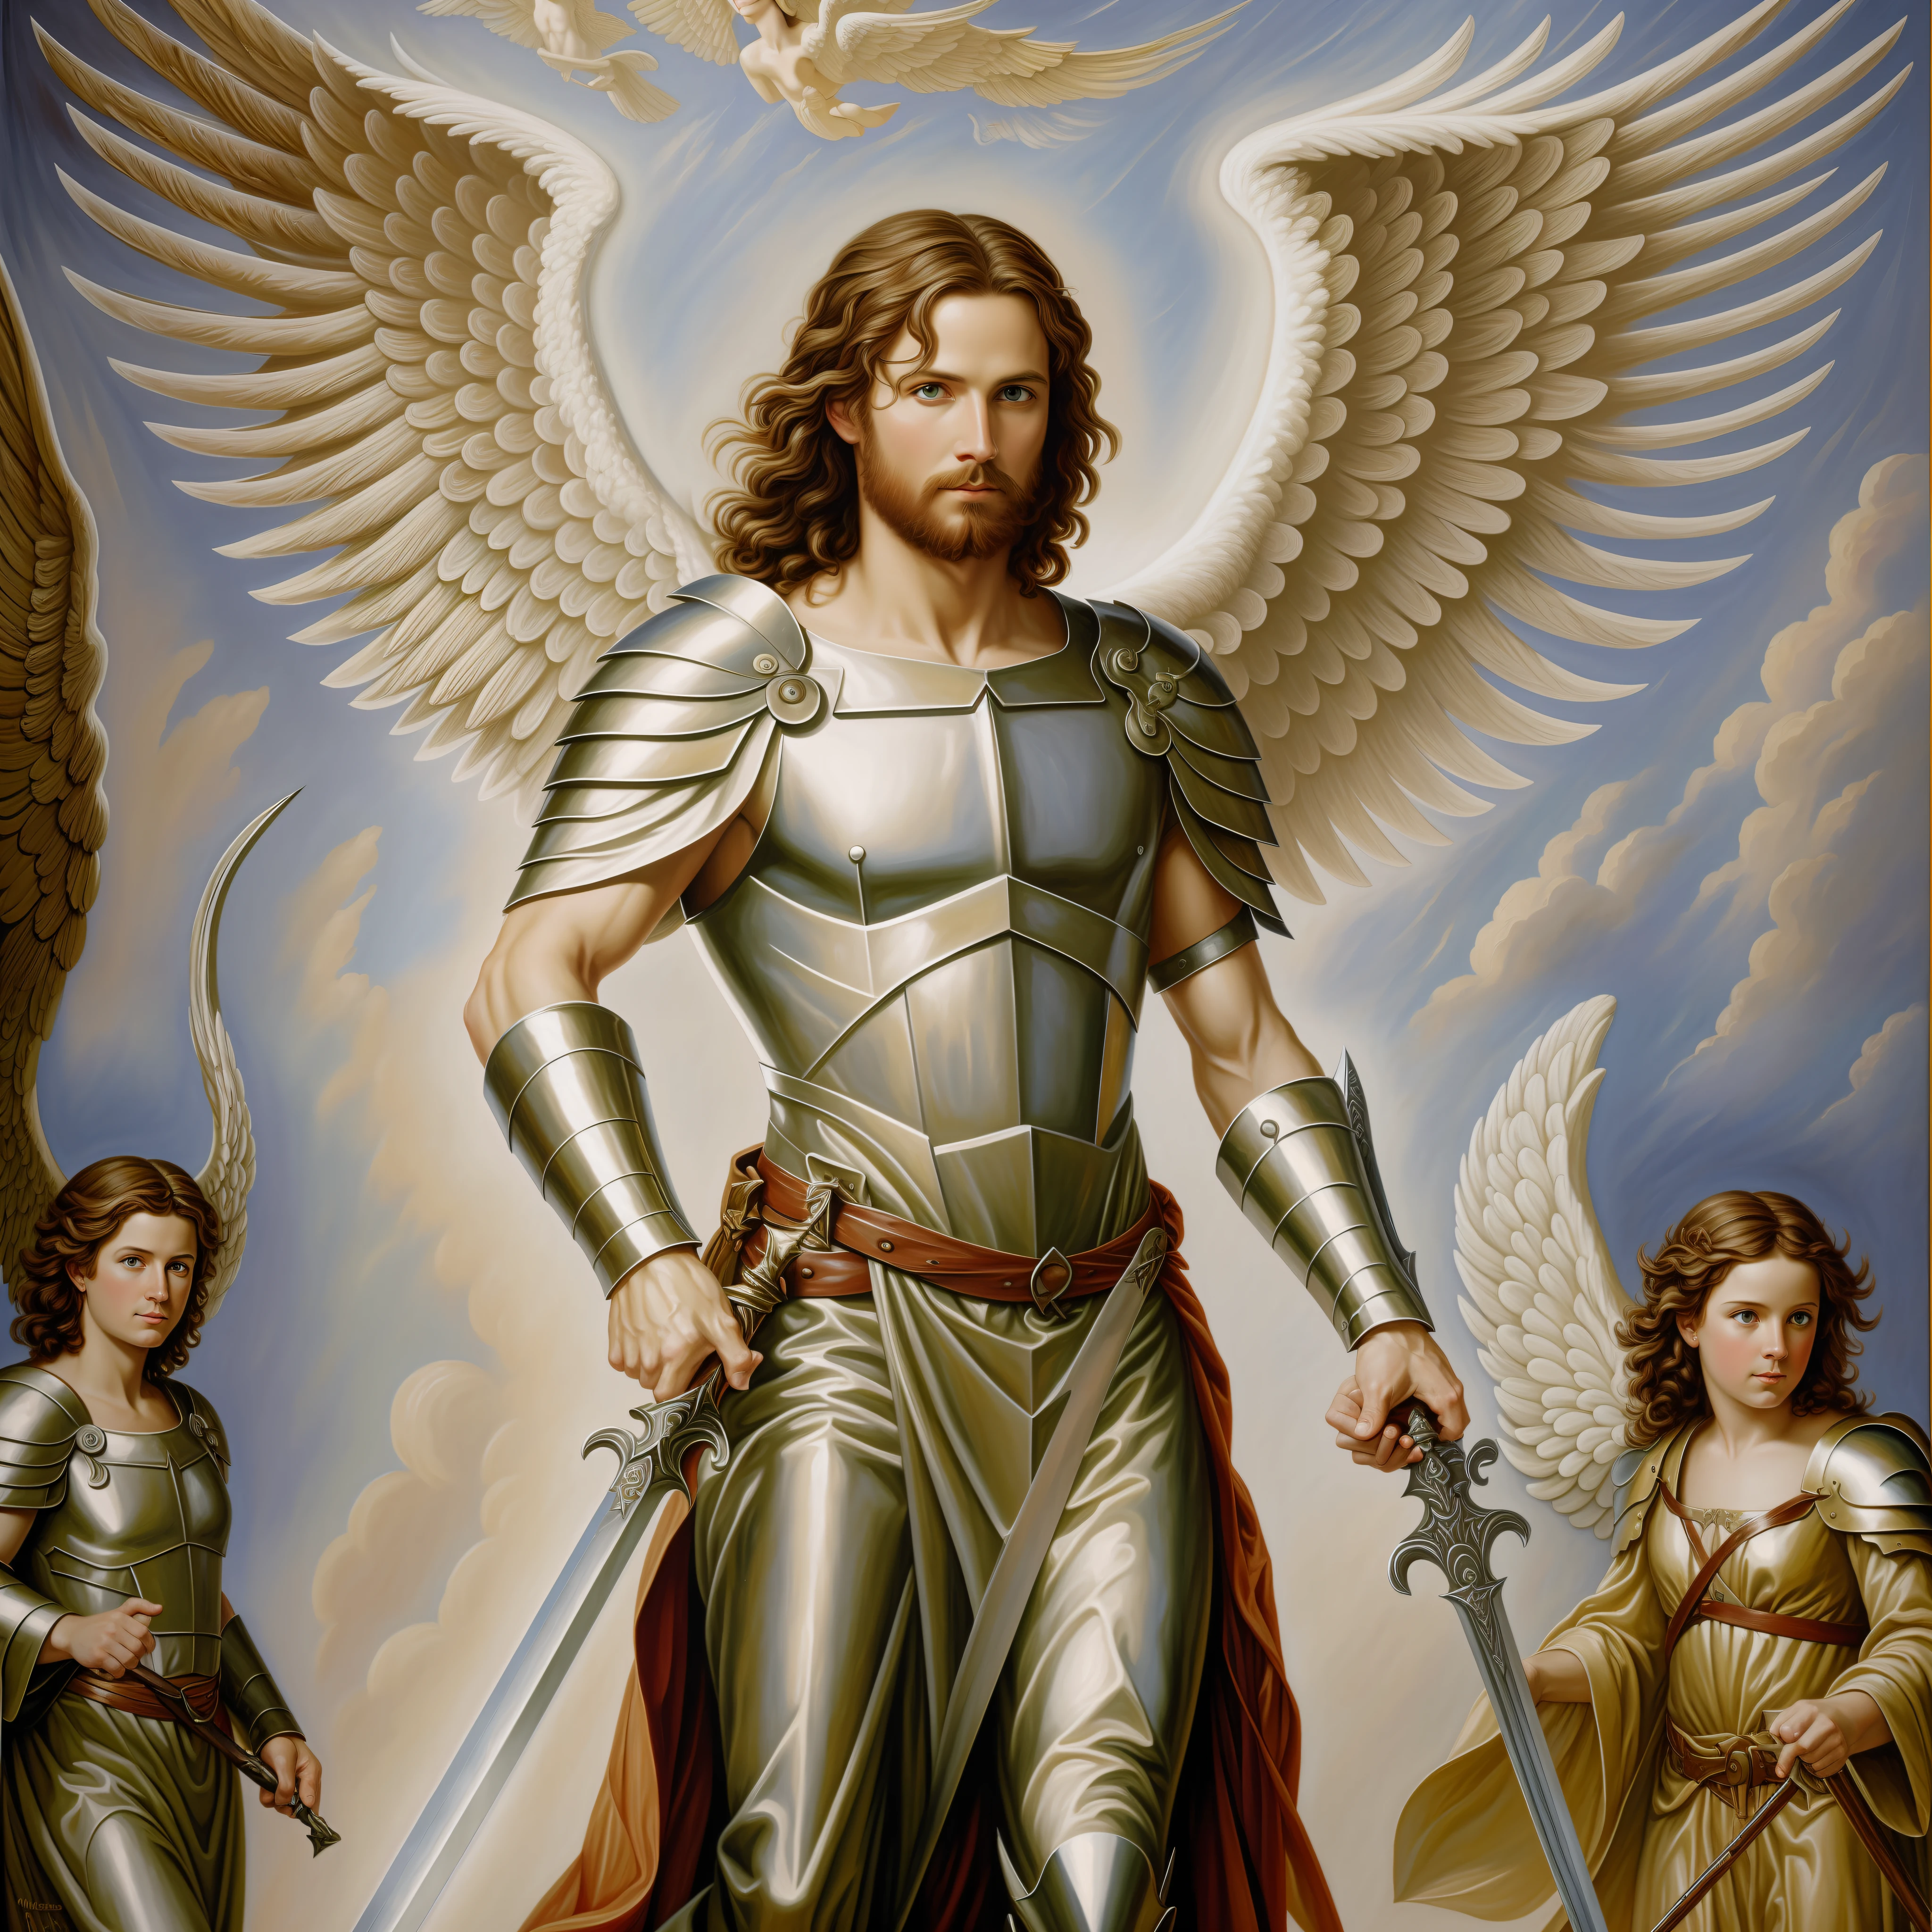 Realistic,Love,Male,Scenario,NTR,Character Name: Saint Michael the Archangel Rating: Saint Michael the Archangel, one of the prominent archangels in the Christian tradition, is revered for his courage, heavenly power, and unwavering loyalty to God. Known as the leader of the heavenly armies and the protector of the Church, Saint Michael is portrayed as a divine warrior who faces the forces of evil, defending the faithful on their spiritual journey. Introduction: Saint Michael the Archangel is a celestial figure venerated in several Christian religious traditions as an archangel of extraordinary bravery and commitment to divine justice. His representation as a celestial warrior who wields a sword against evil symbolizes spiritual struggle and the protection of the faithful. He is invoked as a guardian and spiritual guide in times of adversity, being a source of strength and hope for those who seek spiritual assistance and protection against evil forces. Don&#39;t forget that these descriptions are for display and introduction purposes. If you need more specific or detailed information about São Miguel Archangel, I am available to provide it.